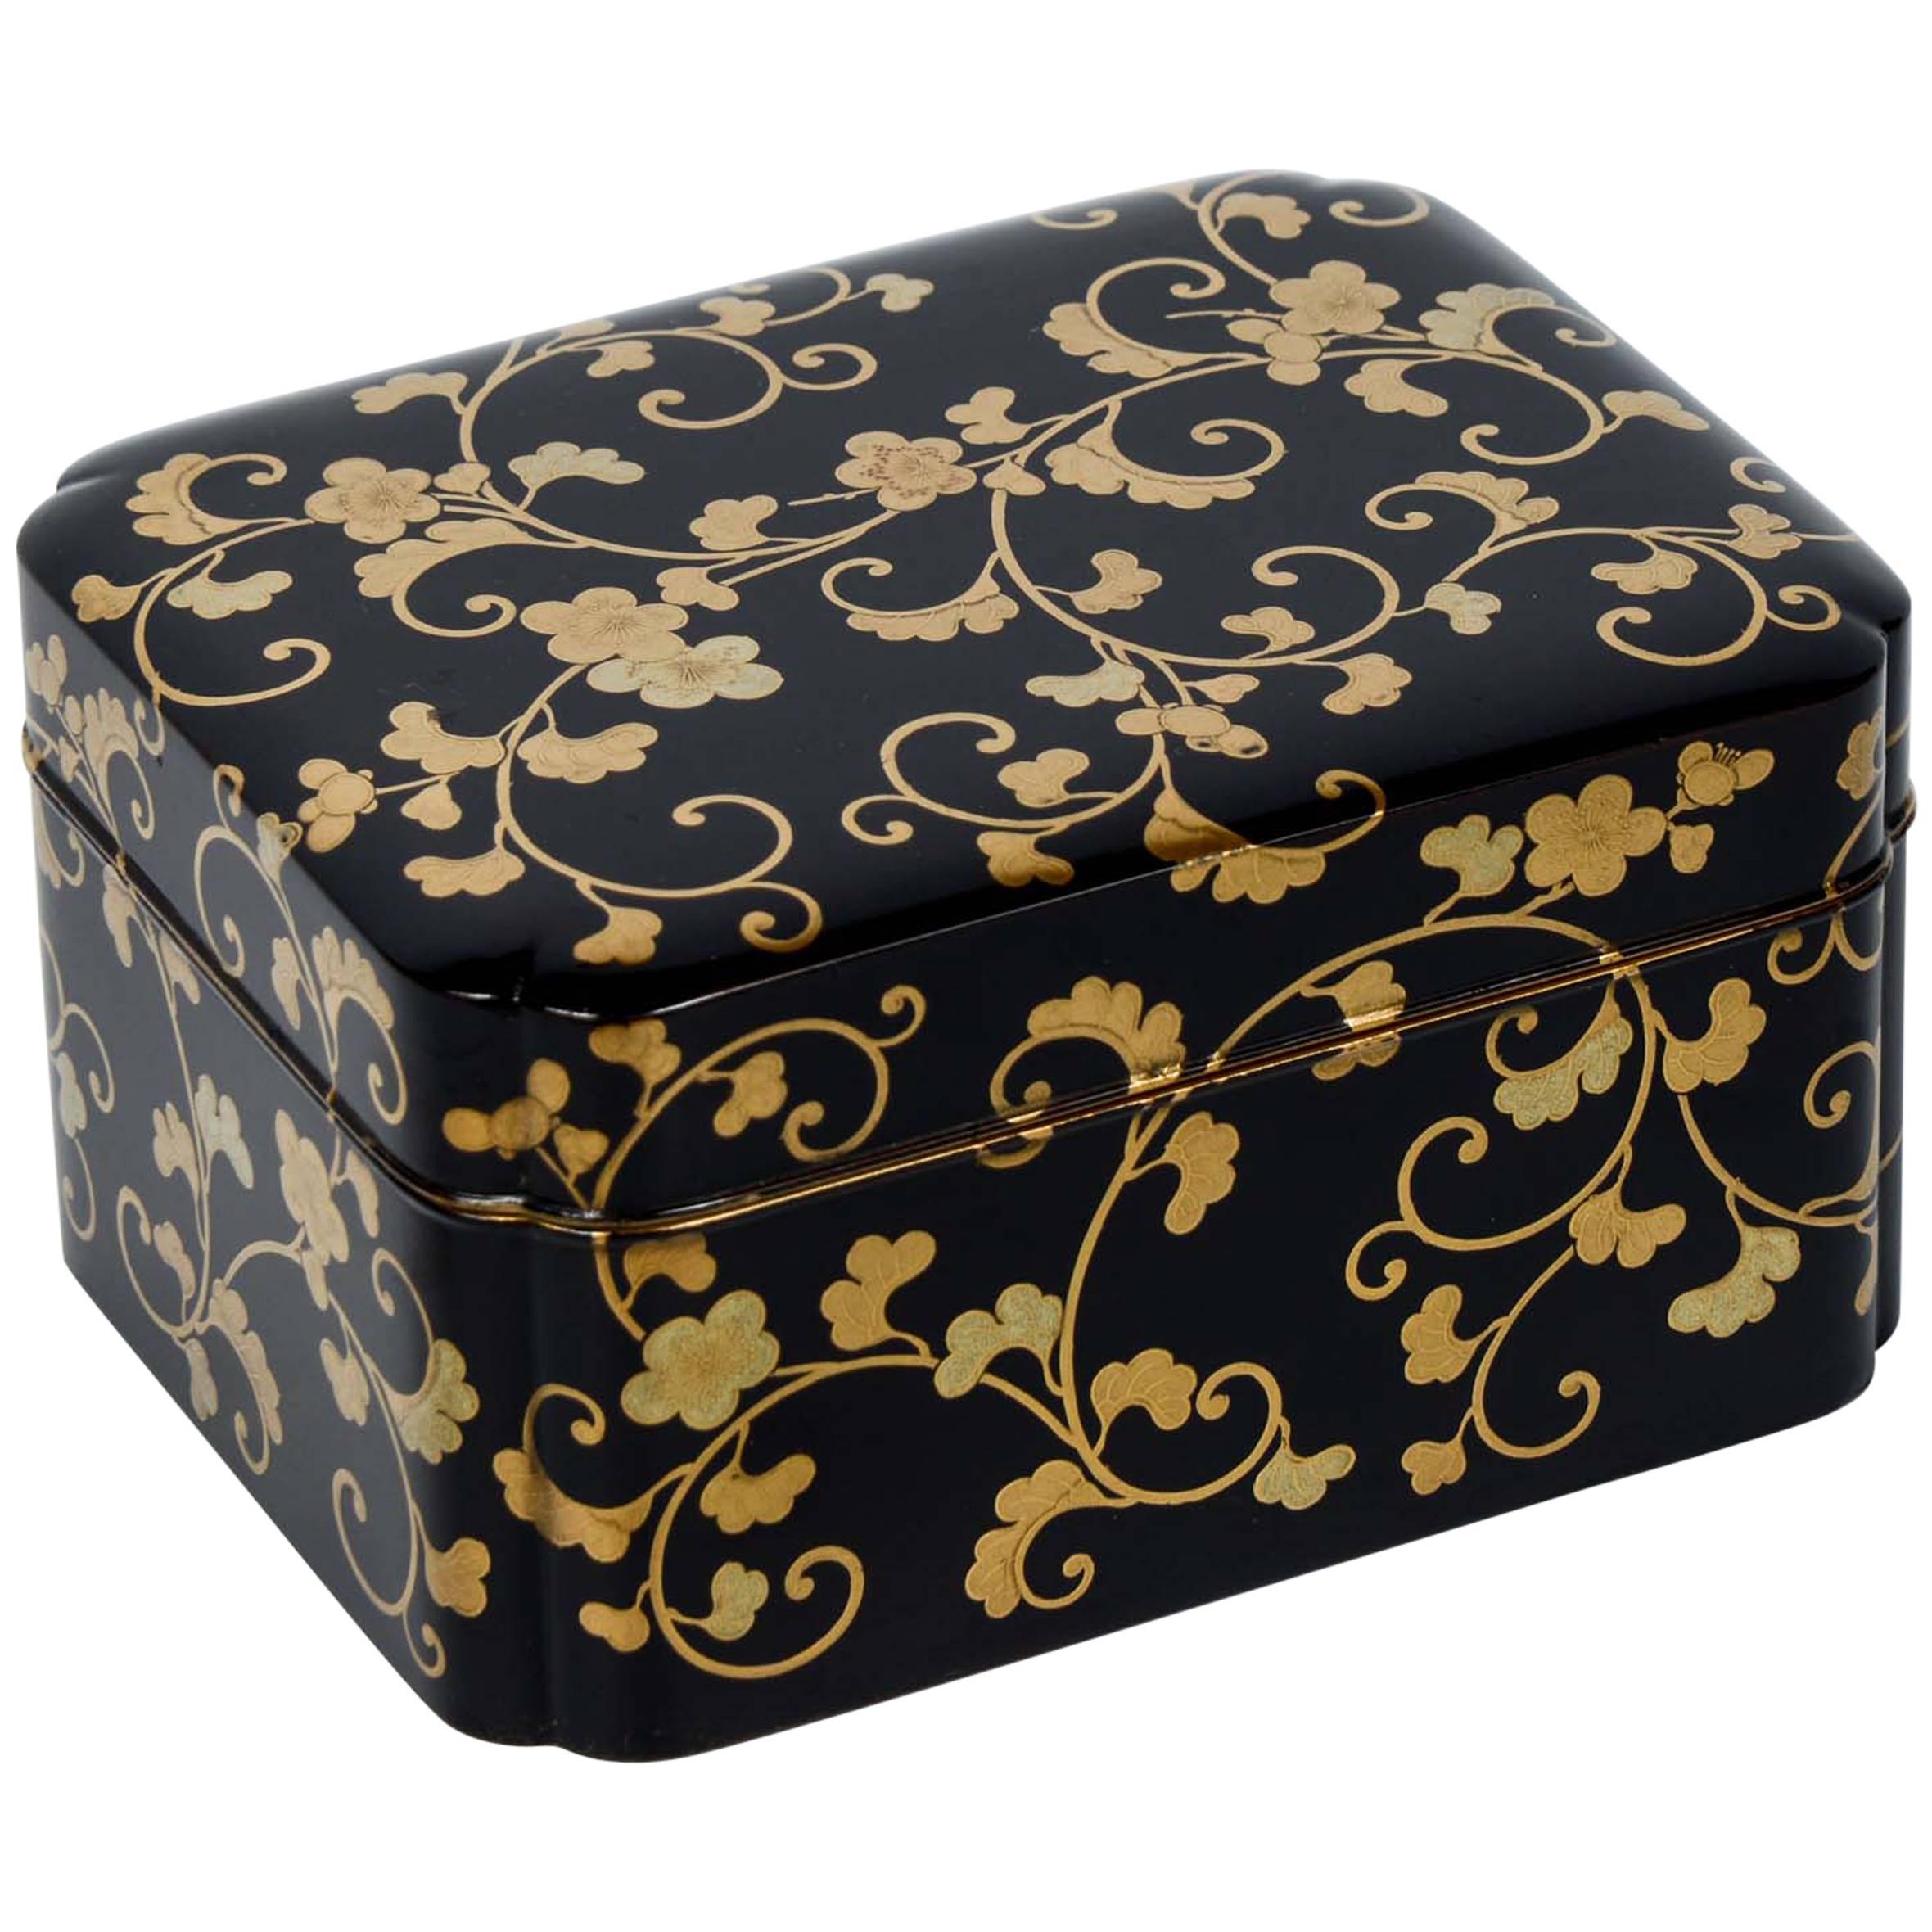 19th Century Meiji Japanese Black and Gold Lacquer Kobako (Lacquer Box)